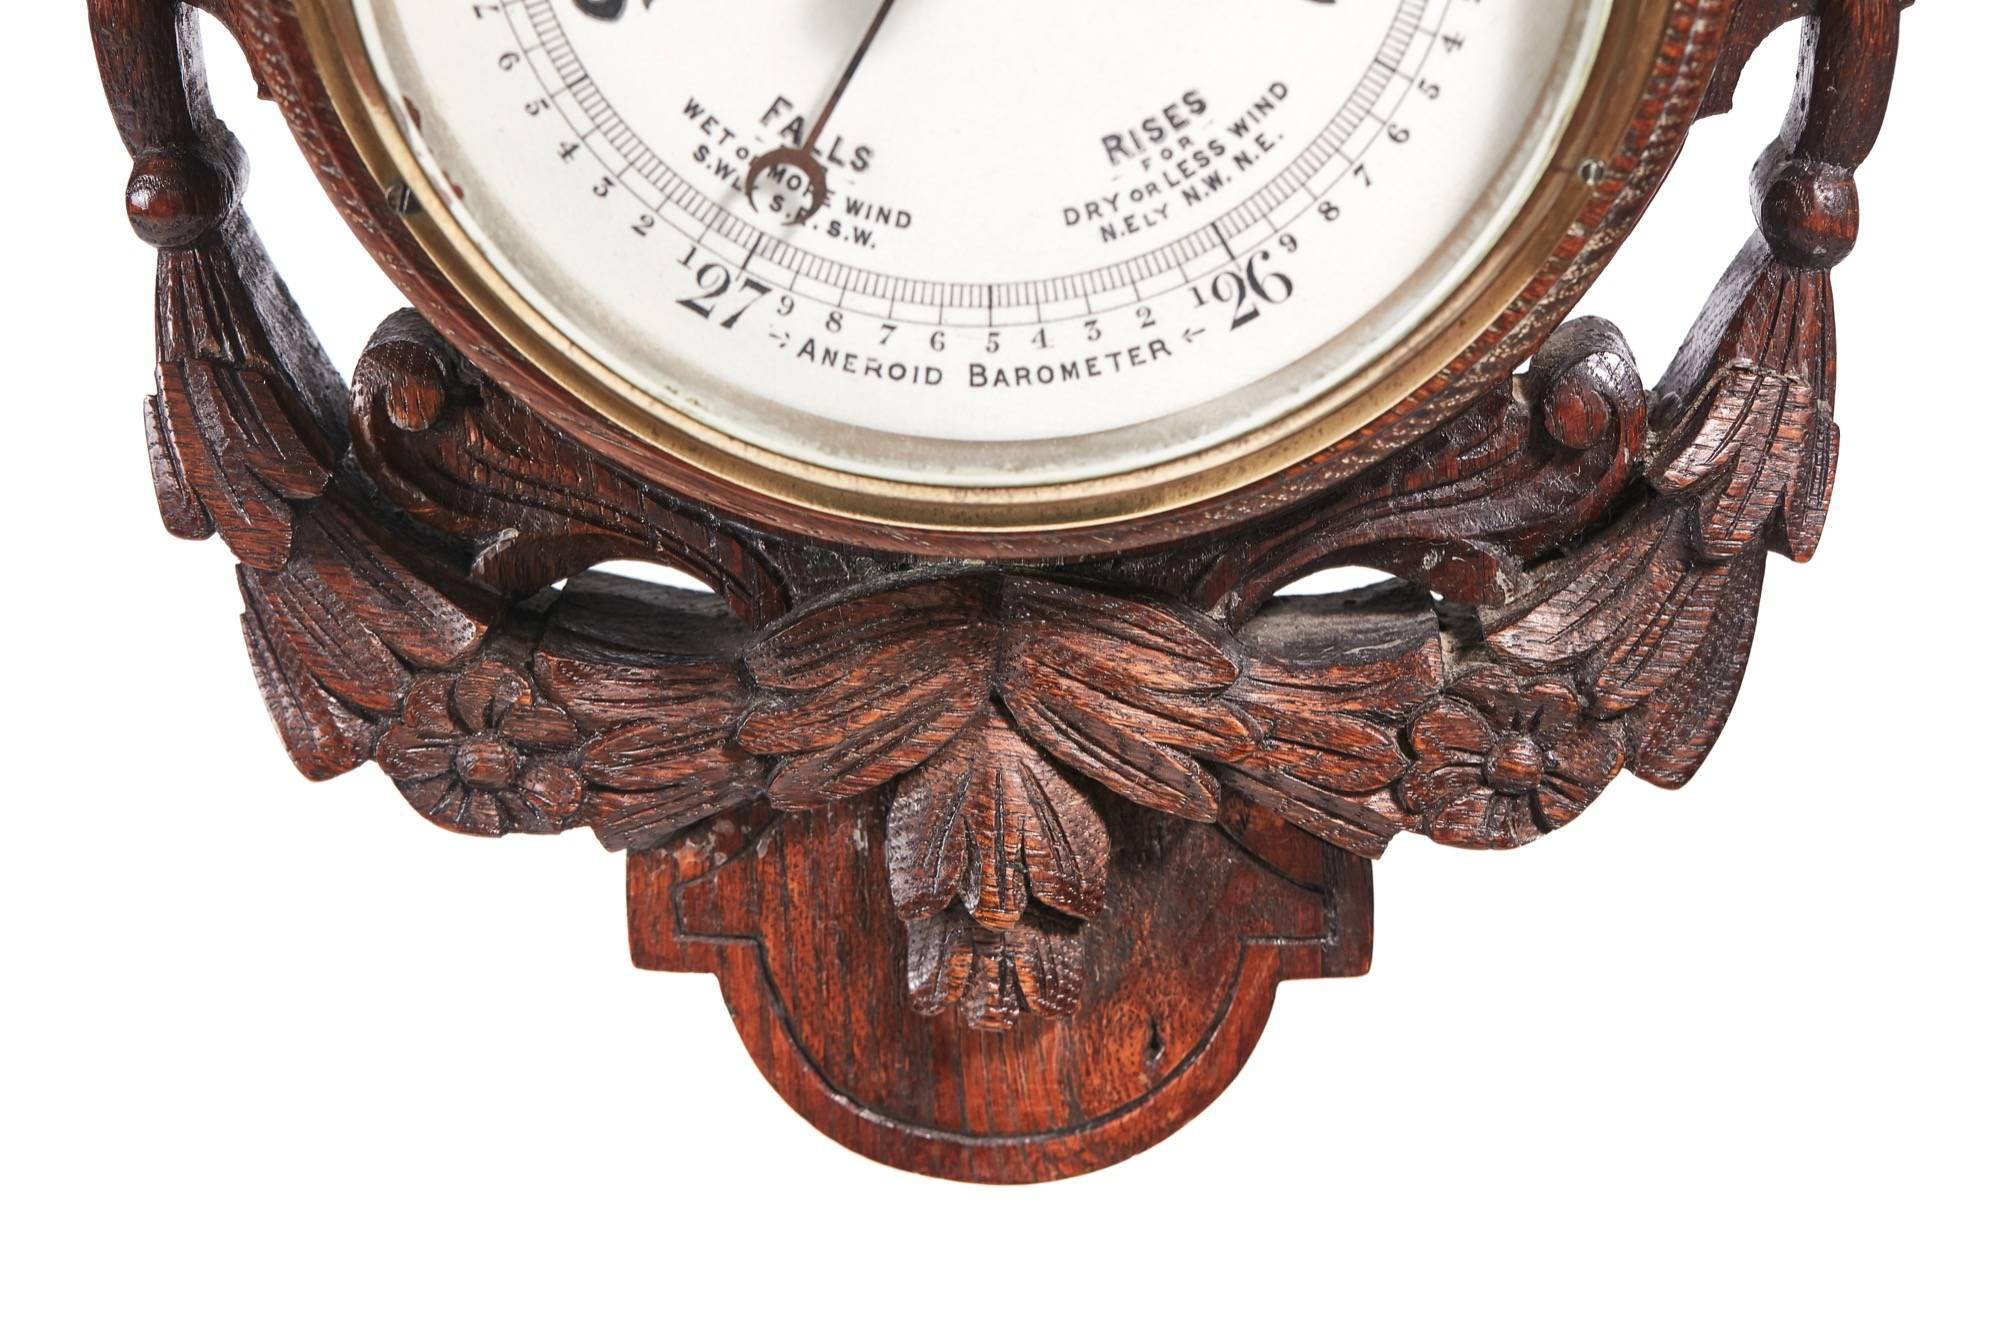 Unusual antique carved oak clock barometer with thermometer, in a lovely case oak case, working older
original key
Lovely color and condition.
Measures: 10